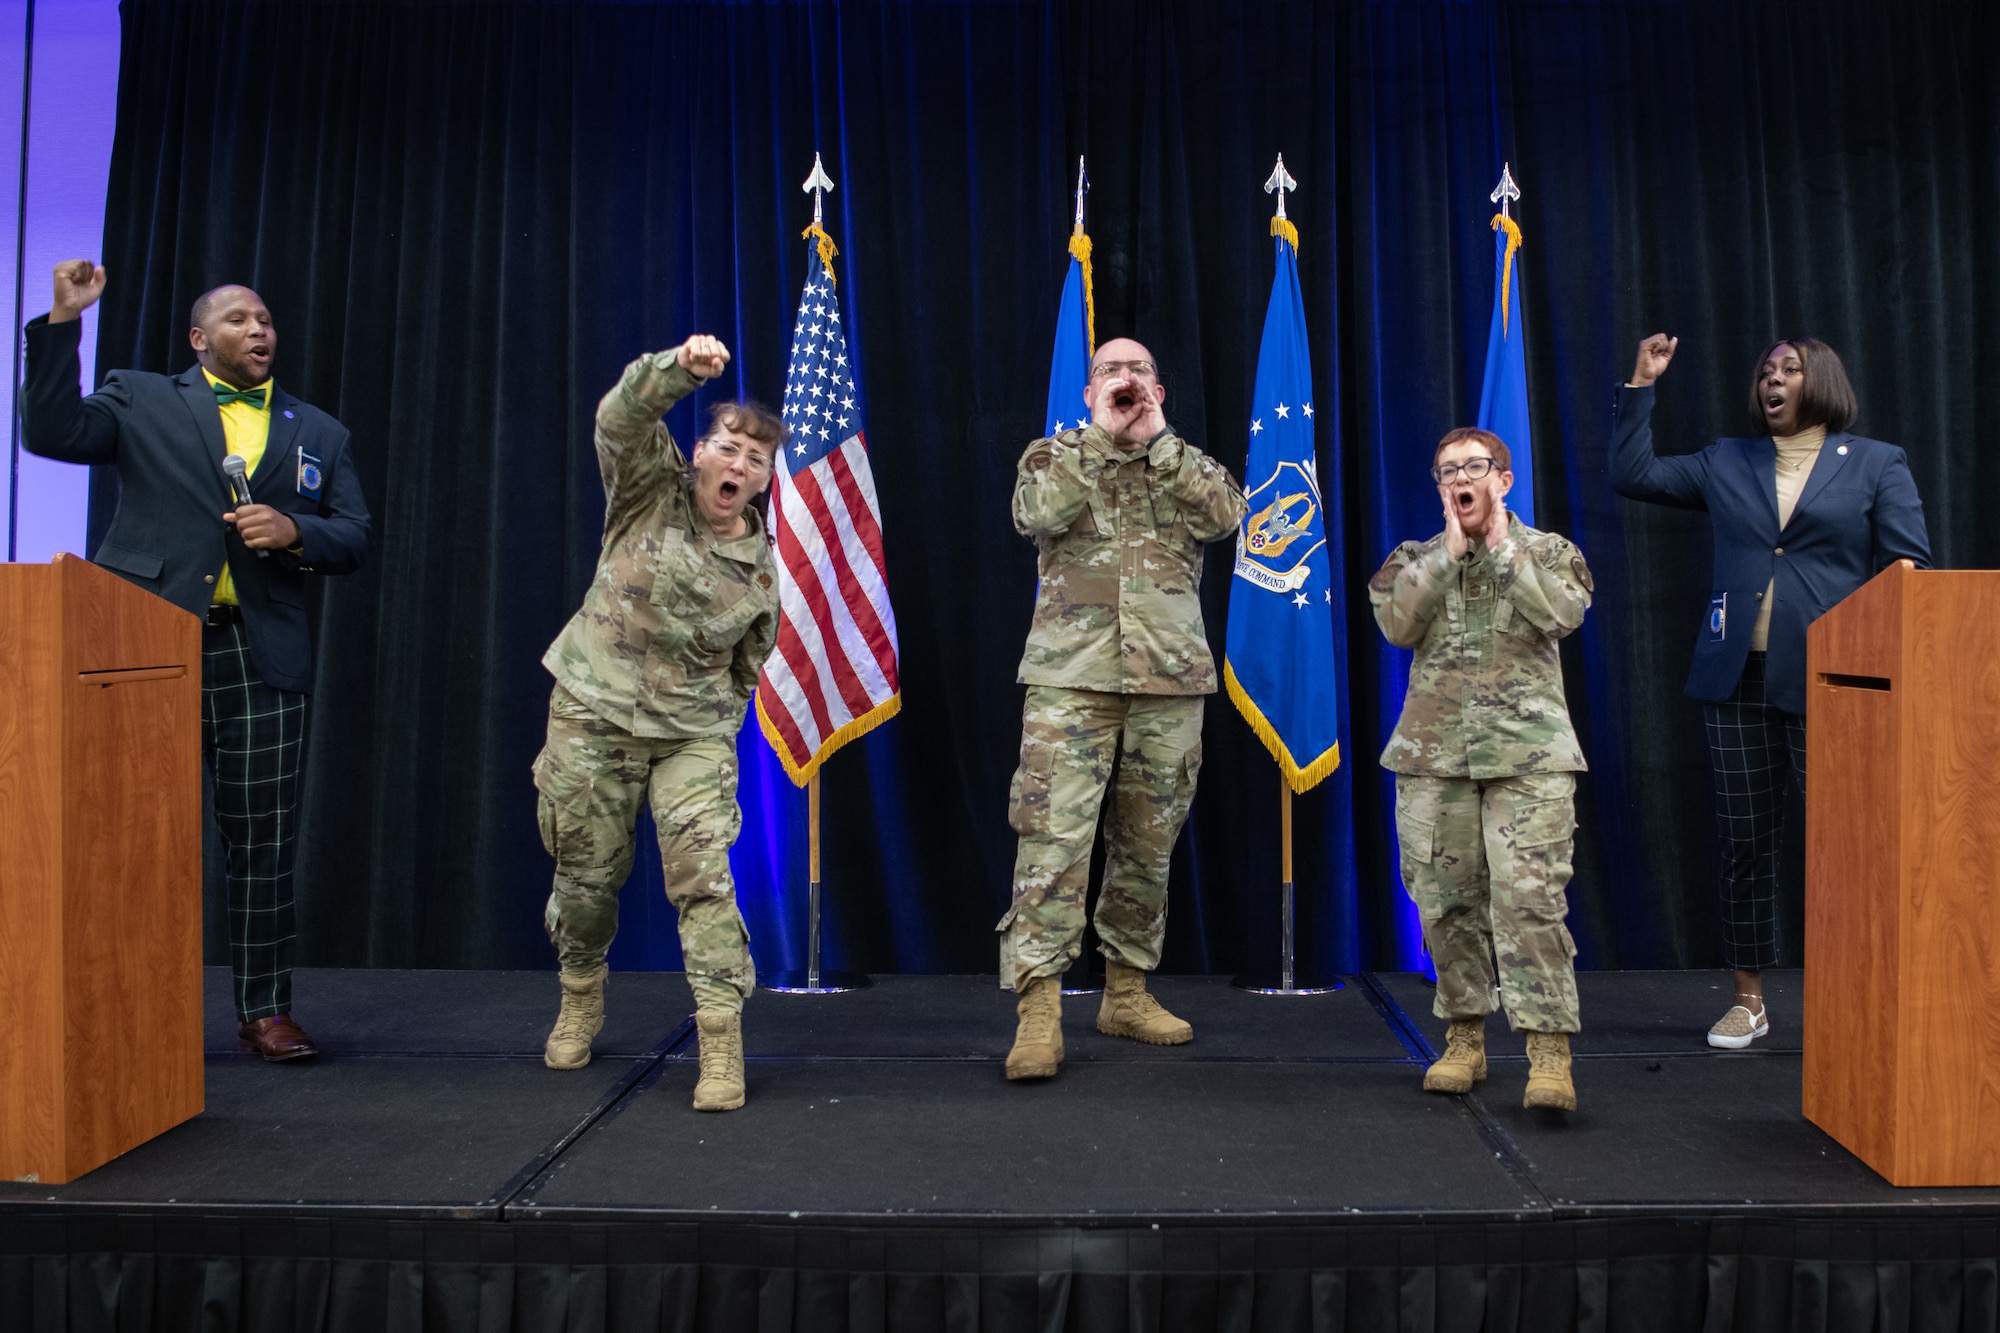 Air Force Recruiting Service leaders shout from the stage